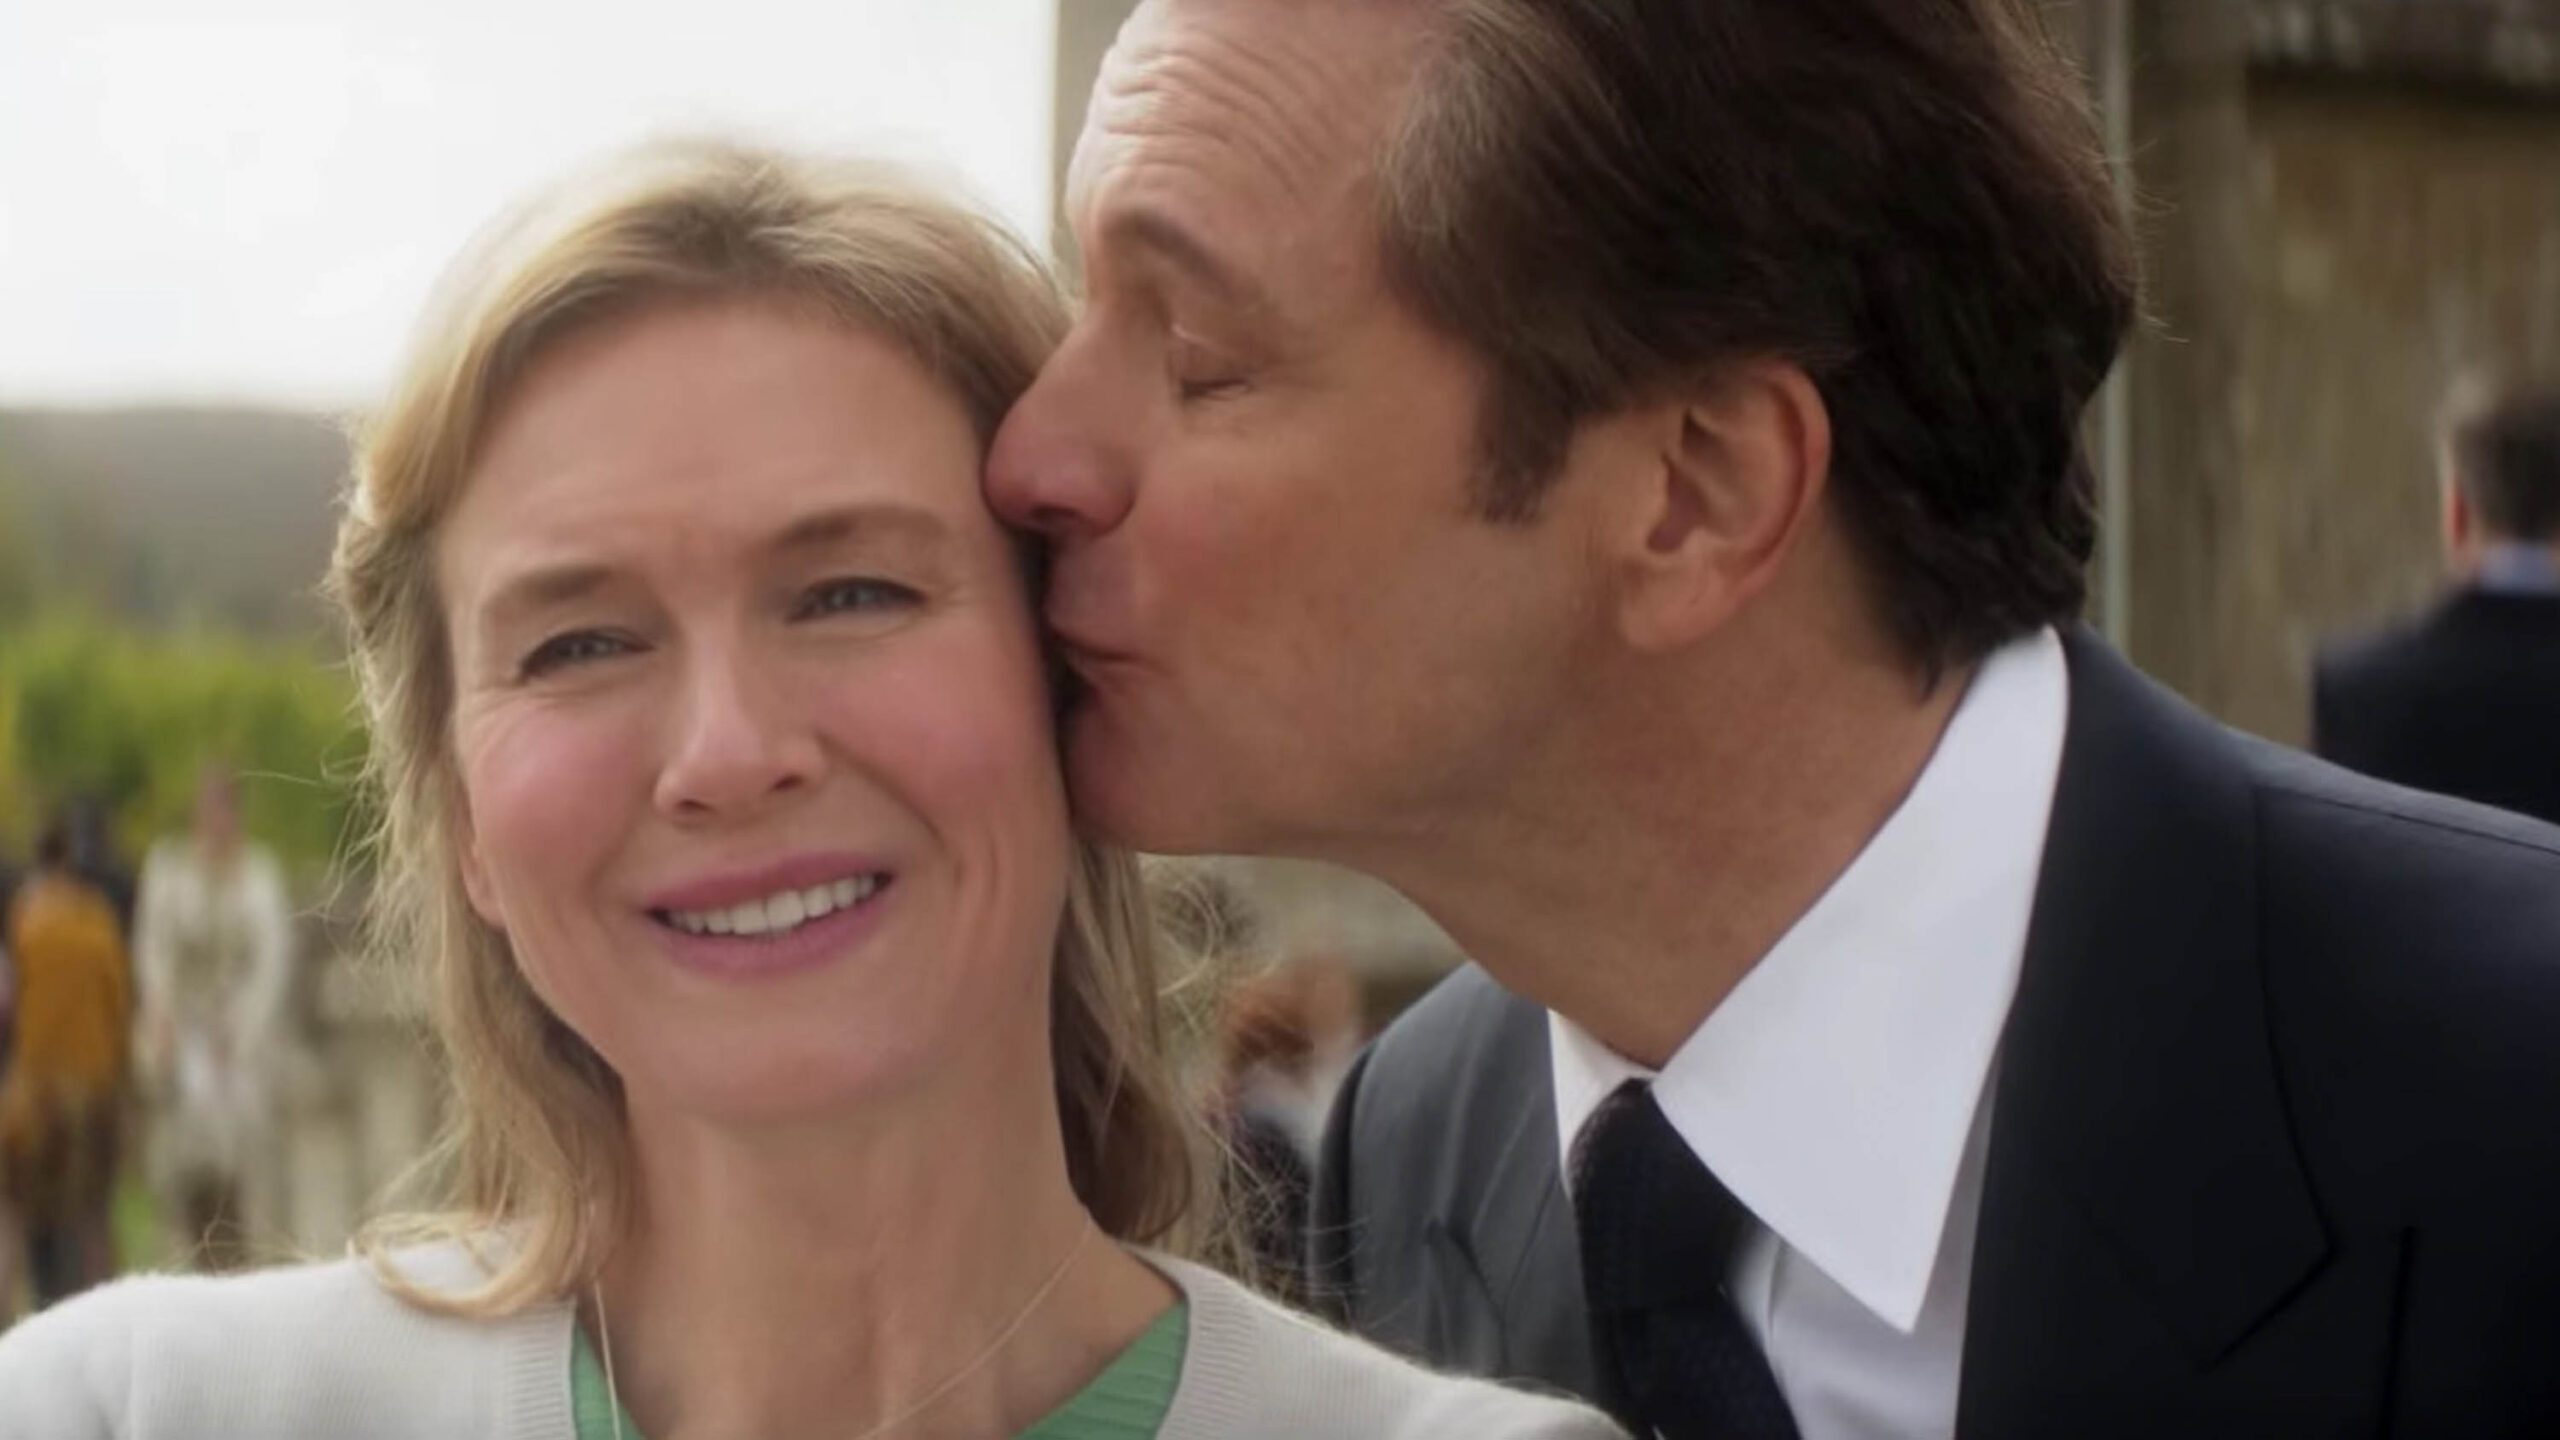 Movie reviews: What critics are saying about ‘Bridget Jones’s Baby’